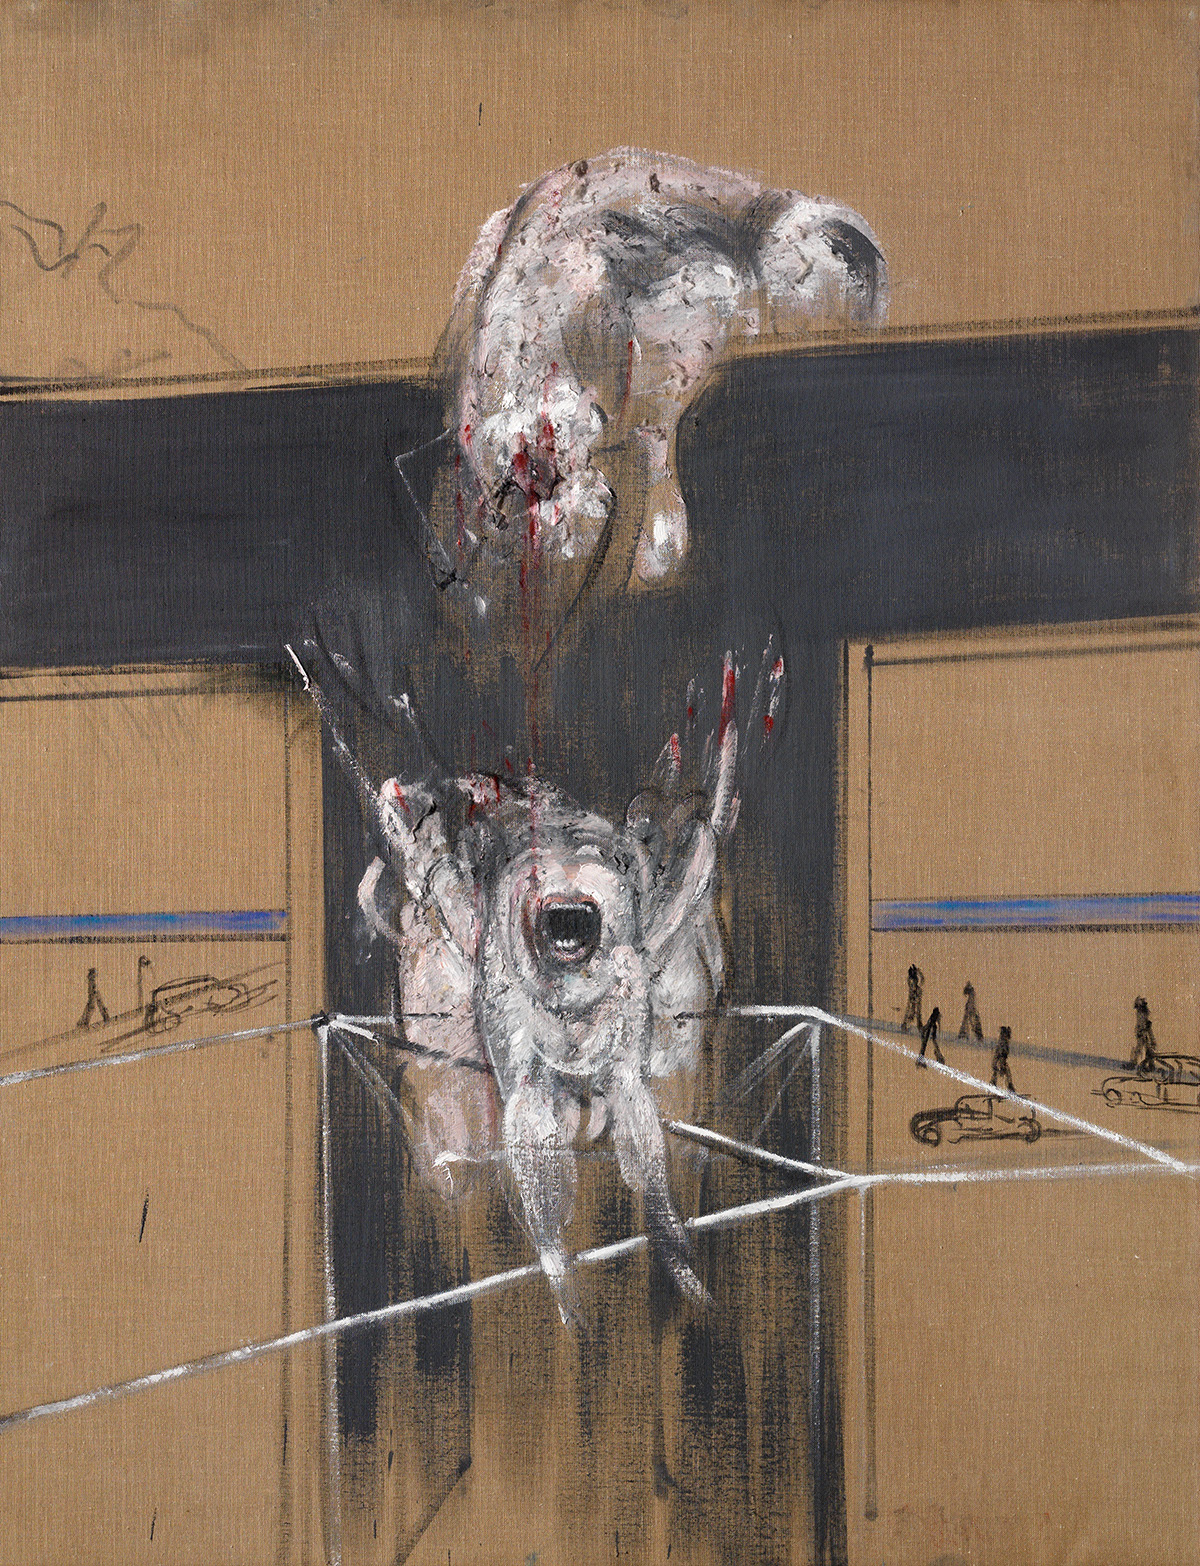 Francis Bacon, Fragment of a Crucifixion. Oil and cotton wool on canvas. CR number 50-02. © The Estate of Francis Bacon / DACS London 2020. All rights reserved.